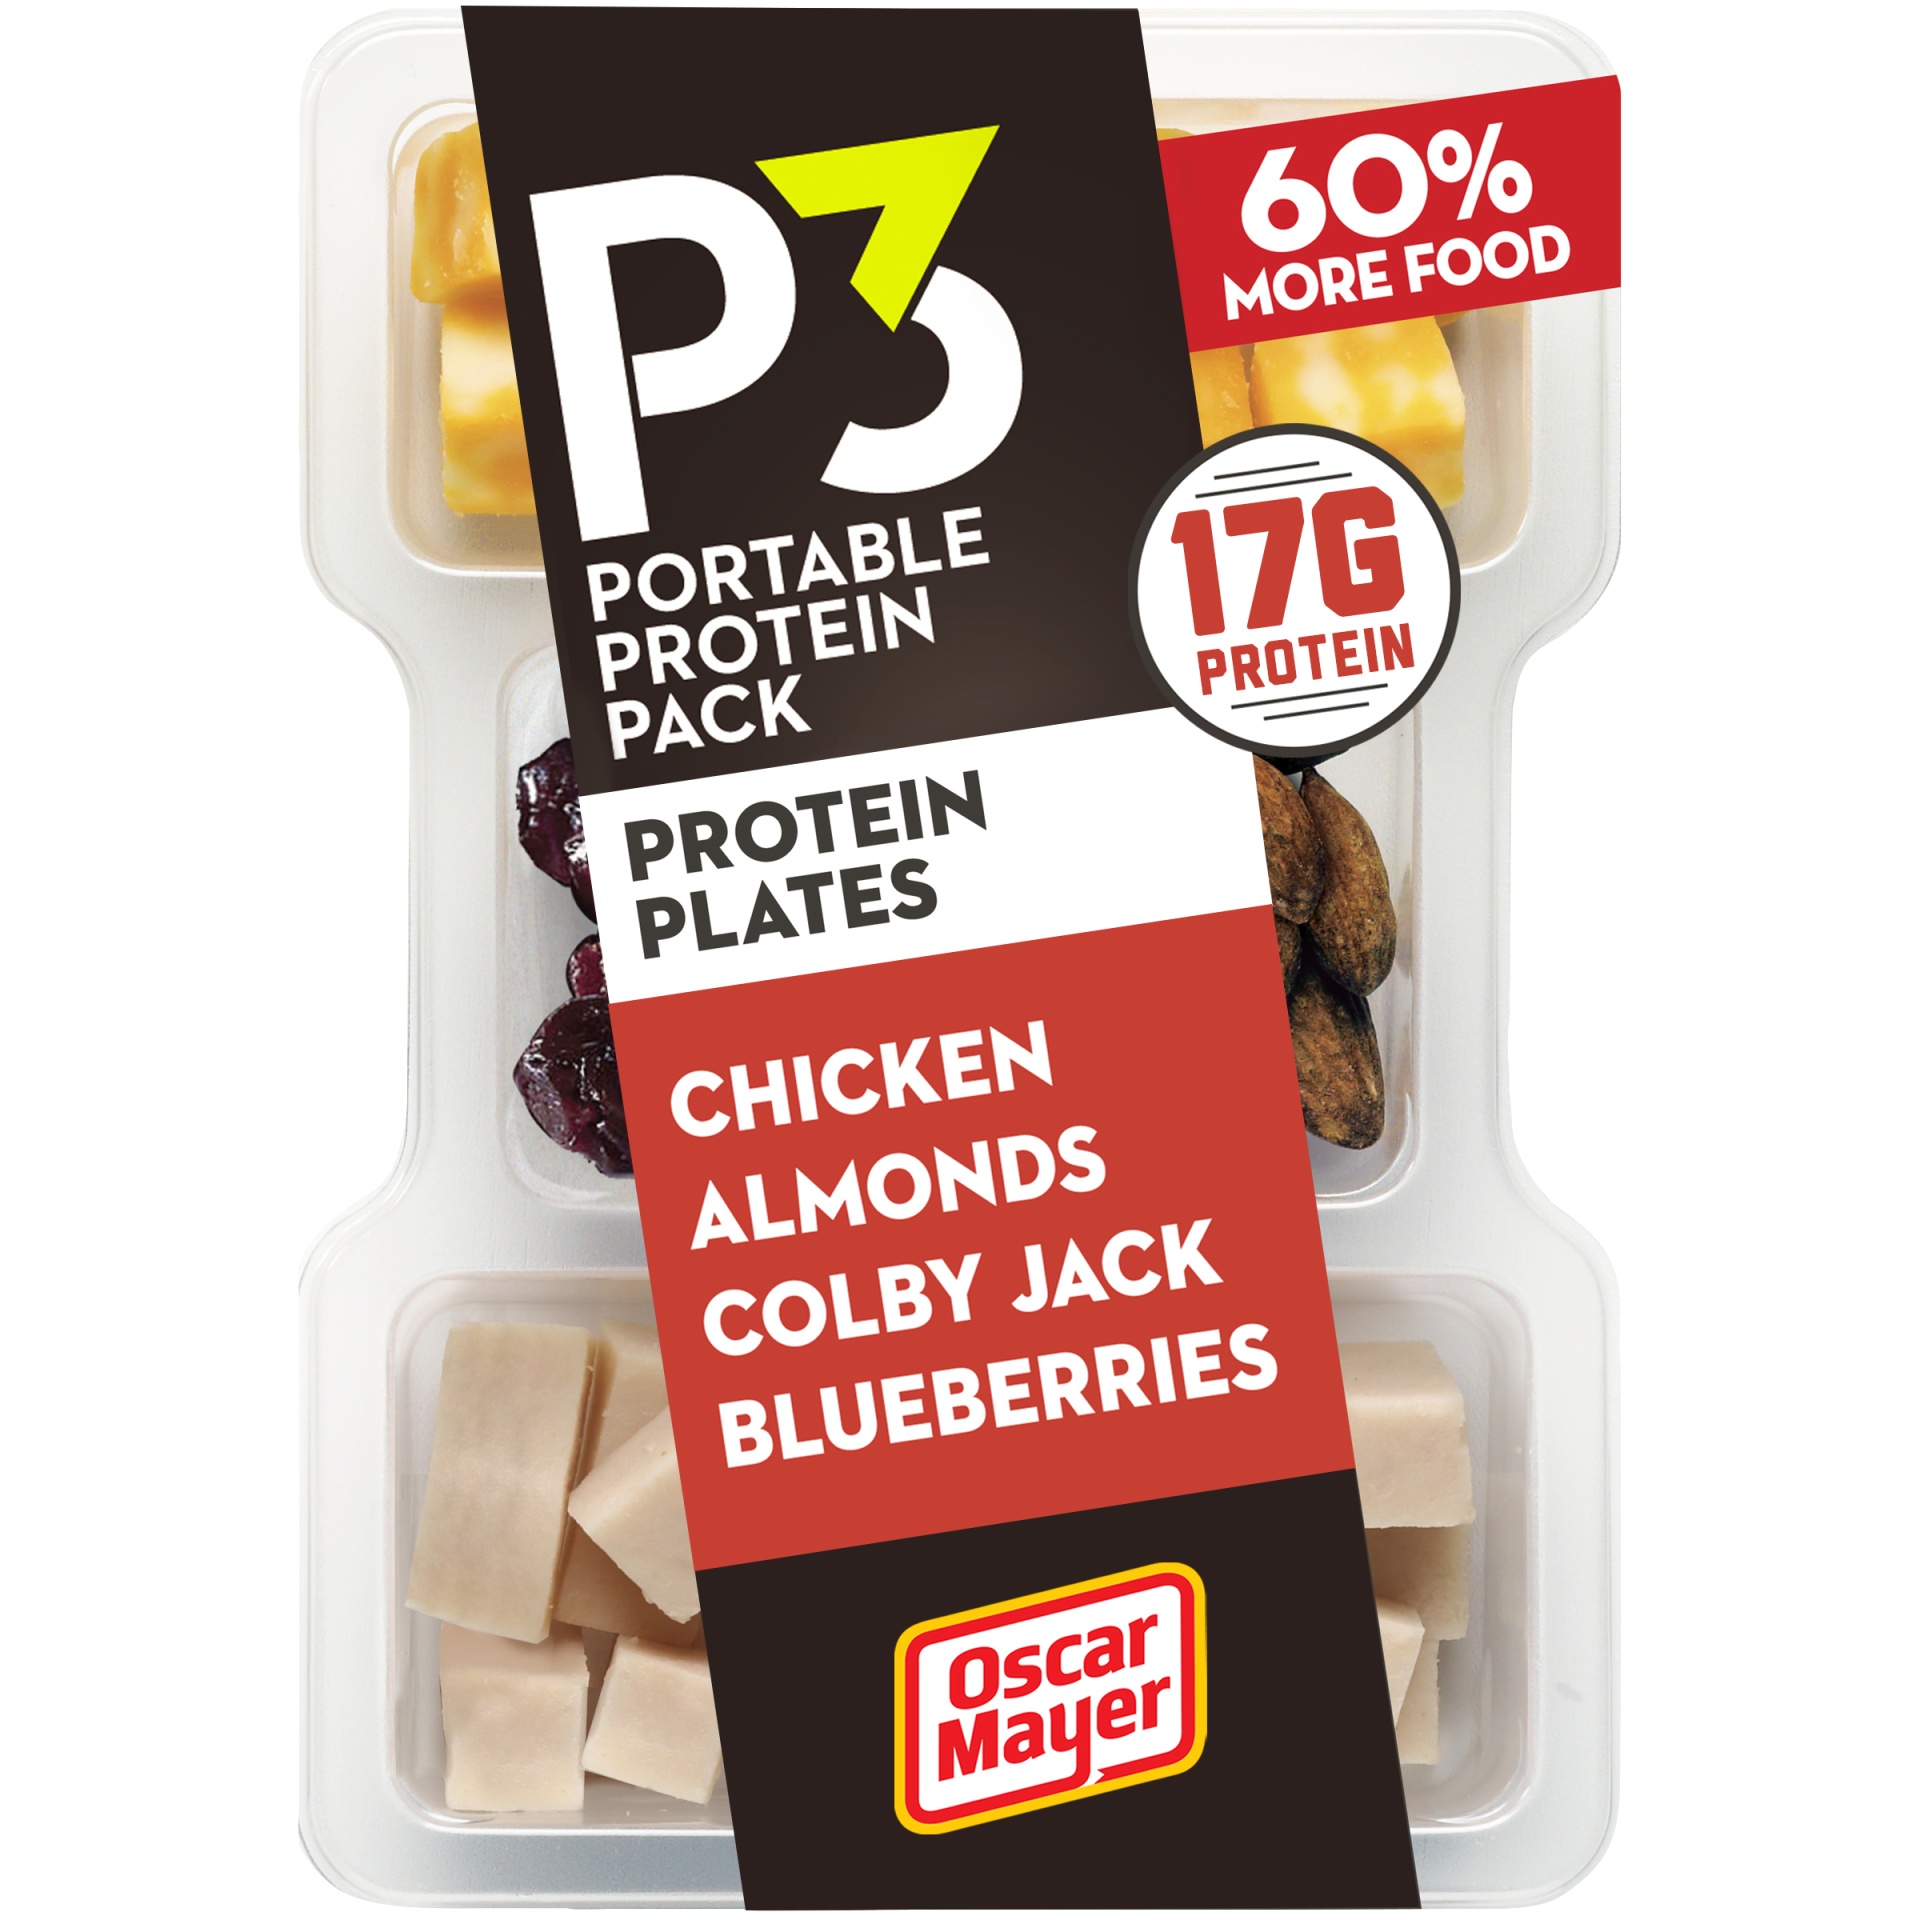 slide 1 of 2, P3 Portable Protein Snack Pack & Protein Plate with Chicken, Almonds, Colby Jack Cheese & Blueberries Tray, 3.2 oz